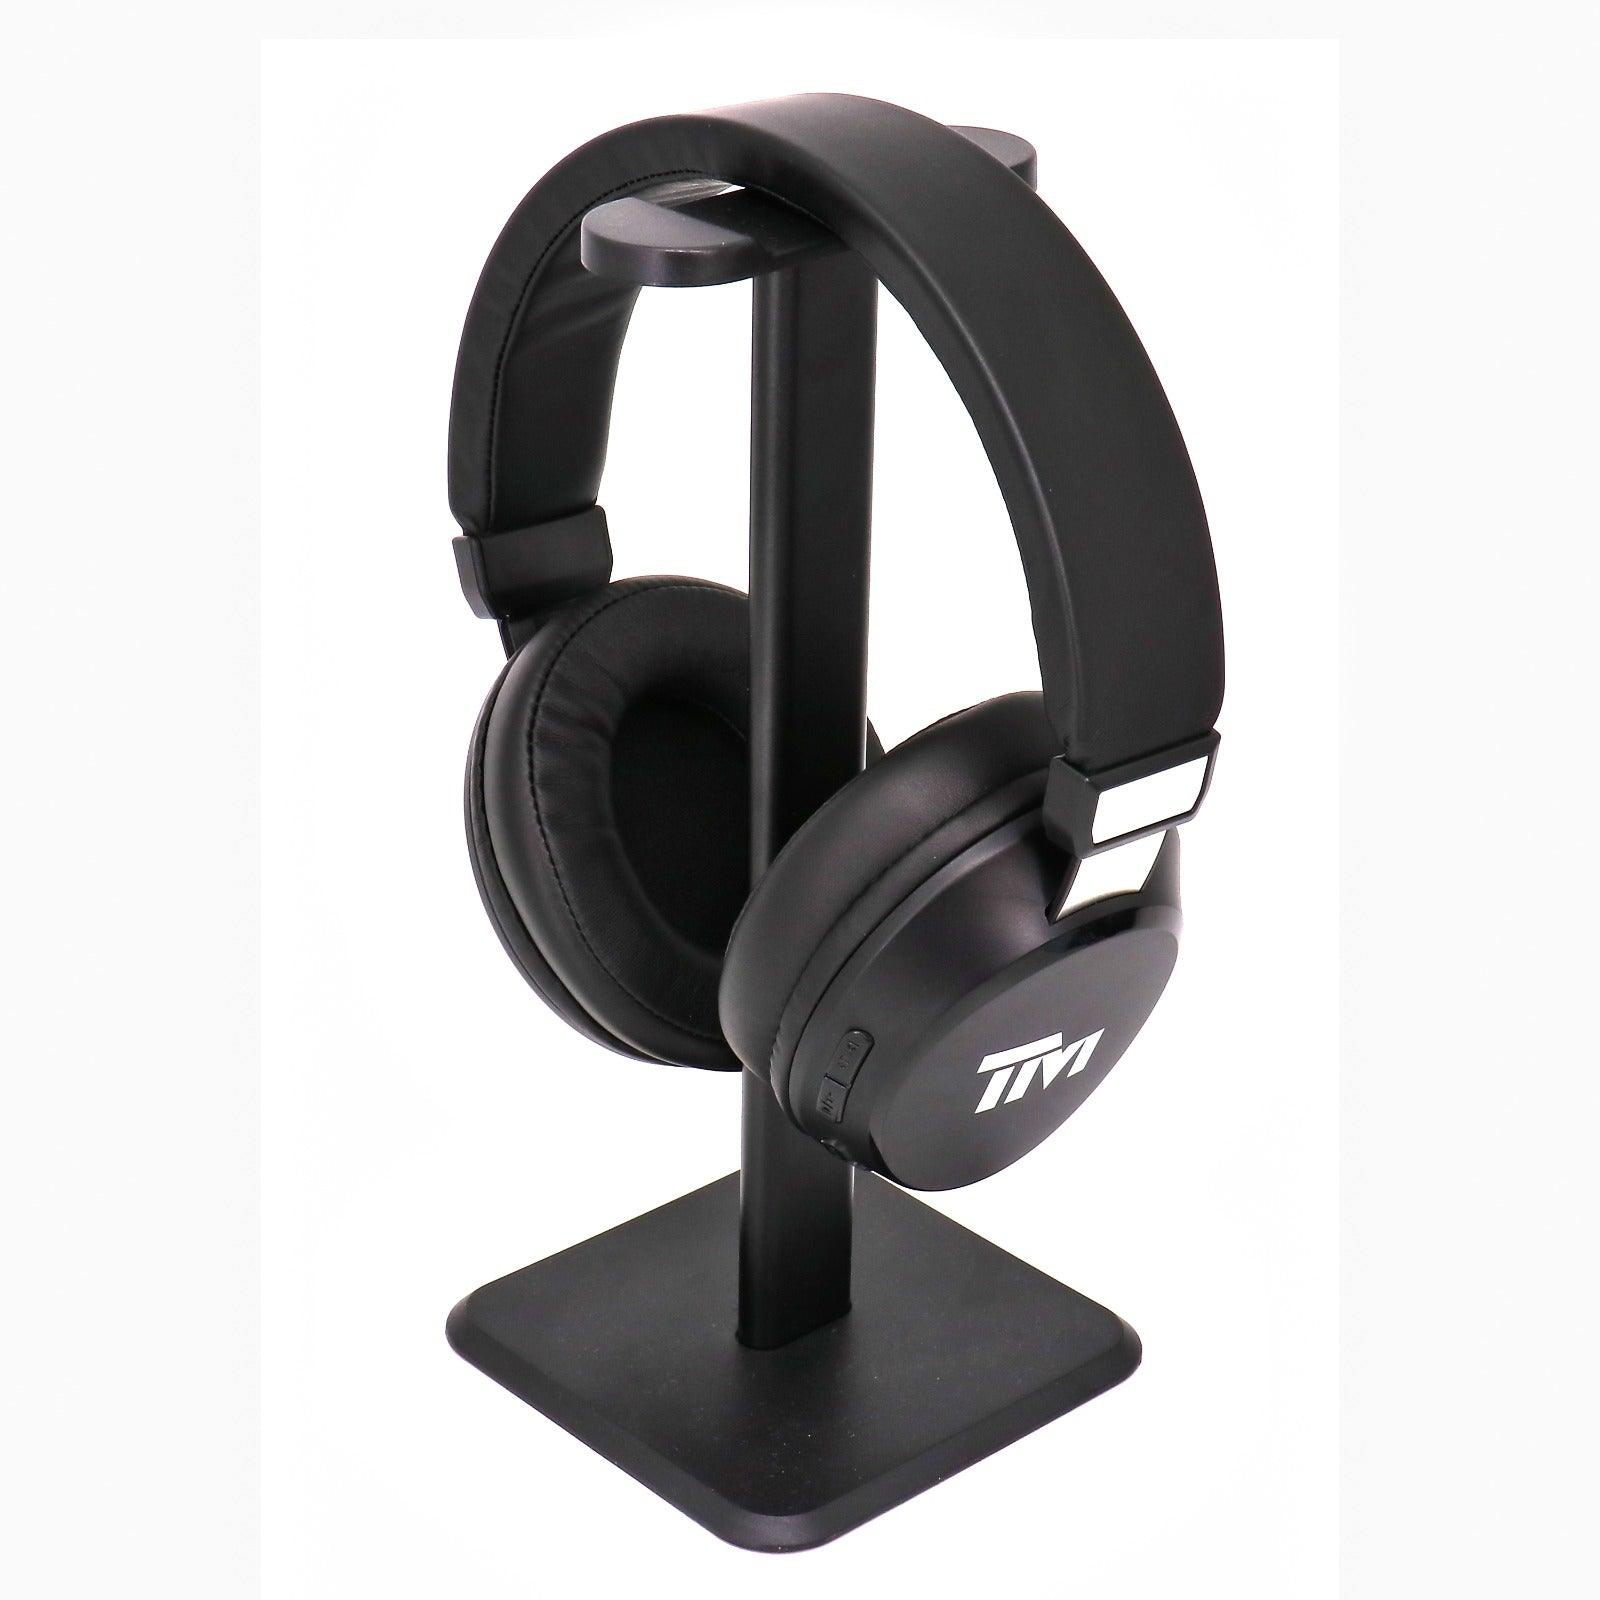 Twisted Minds G2 Wireless Gaming Headset - Black - سماعات